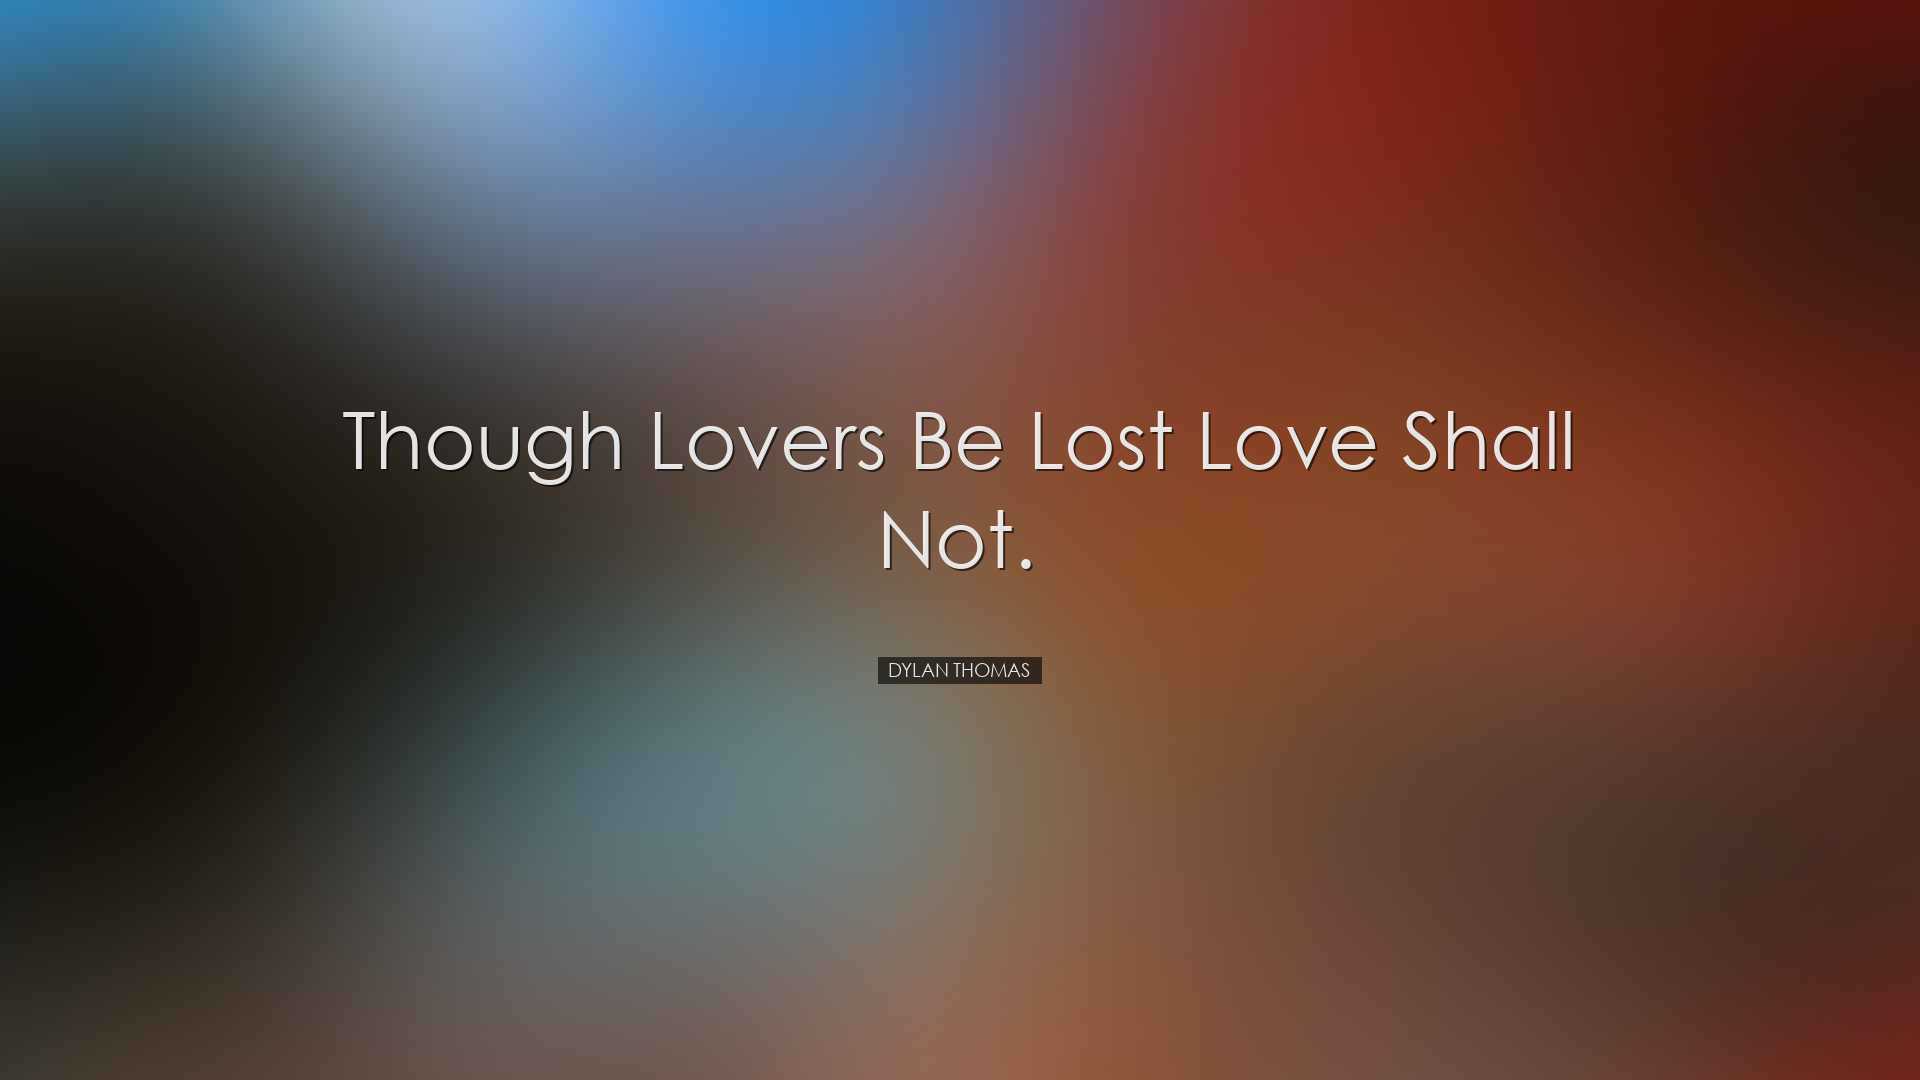 Though lovers be lost love shall not. - Dylan Thomas